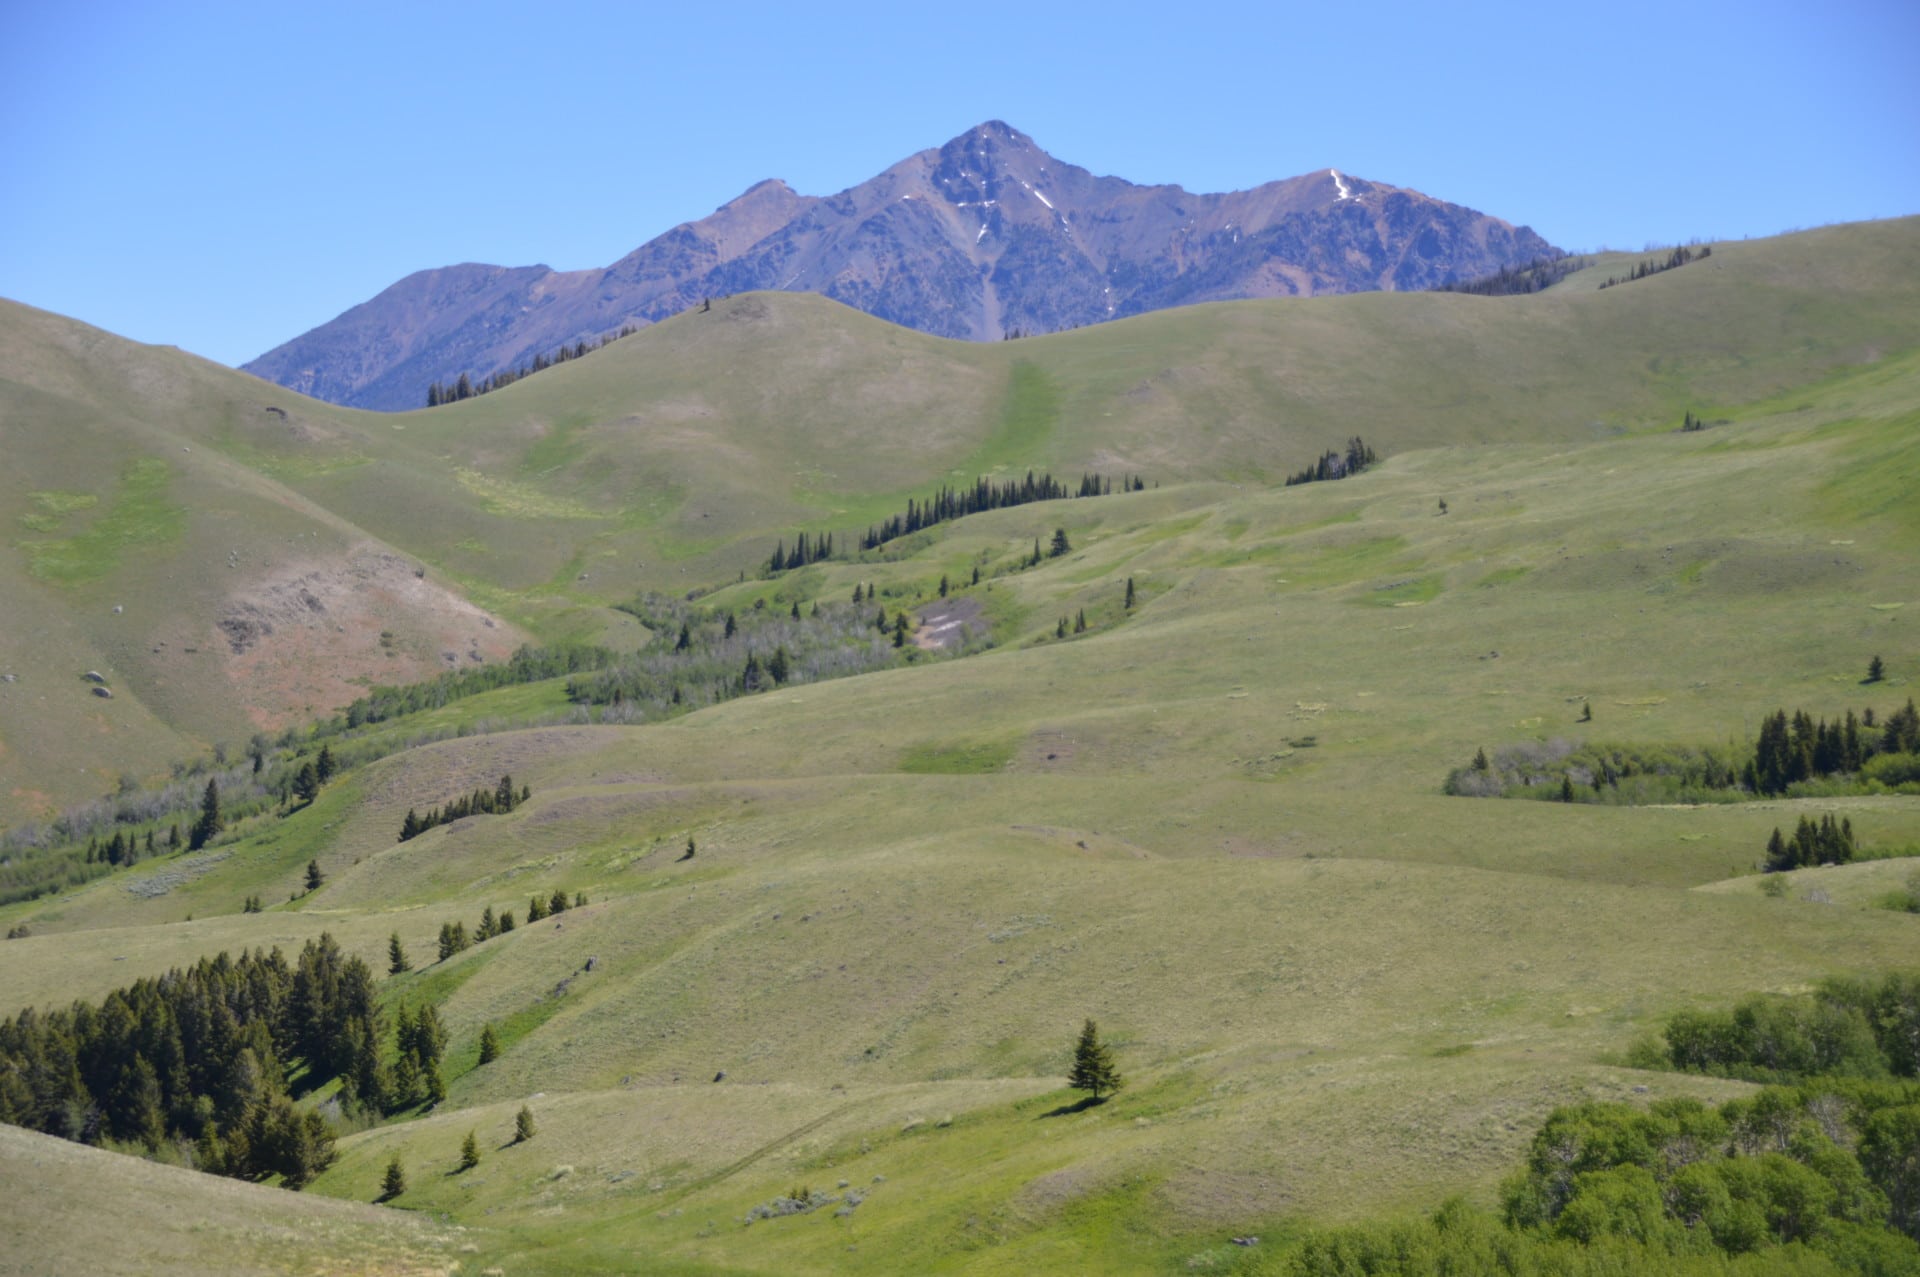 Big Game Hunting Ranch For Sale Montana Dome Mountain Ranch